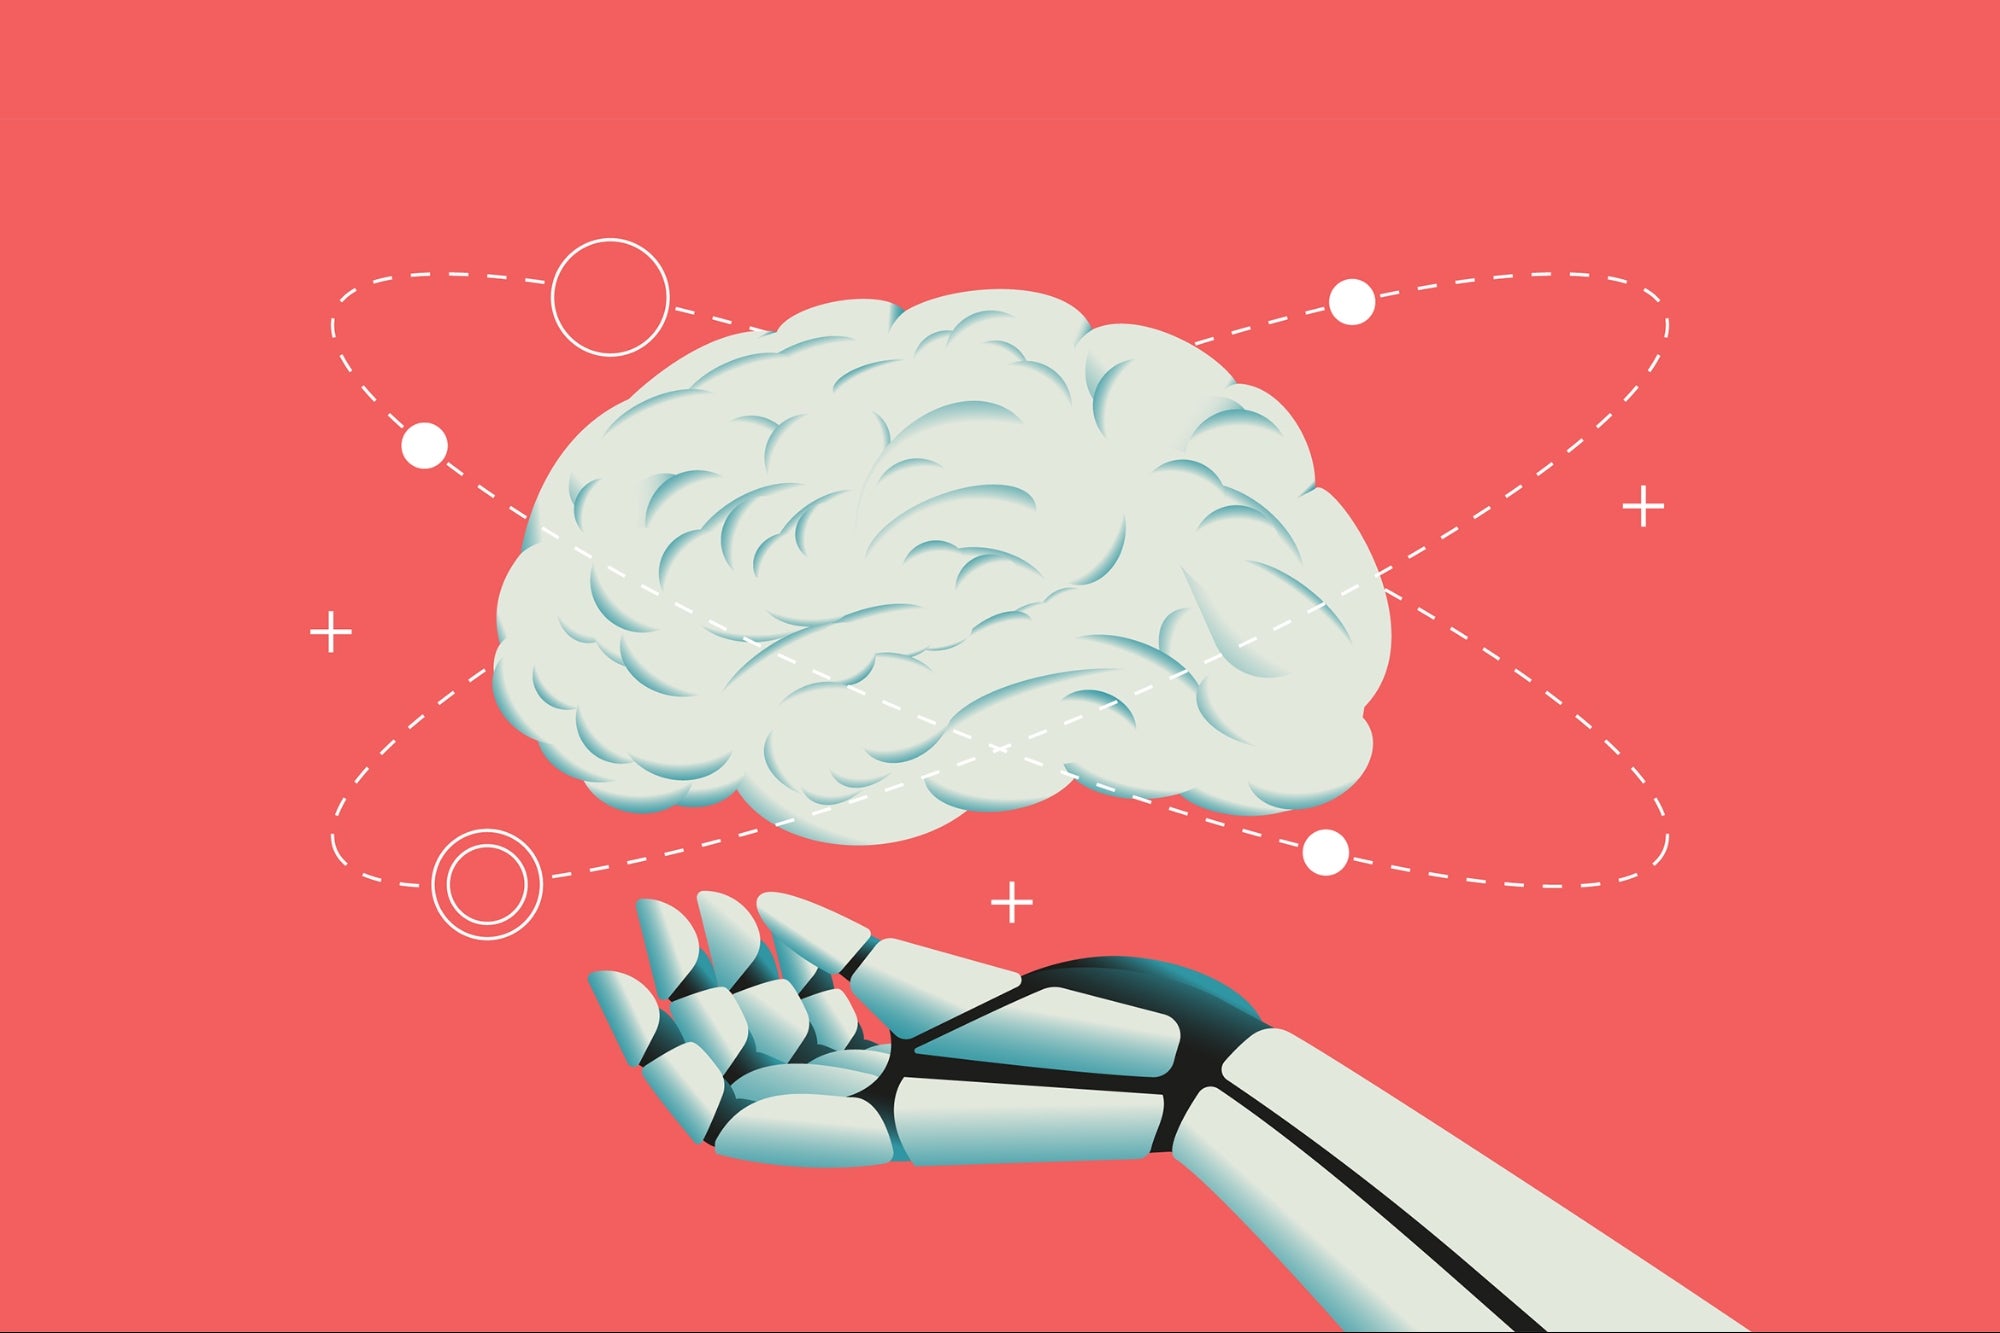 5 Areas Where Every Business Should Be Using Cognitive AI Today